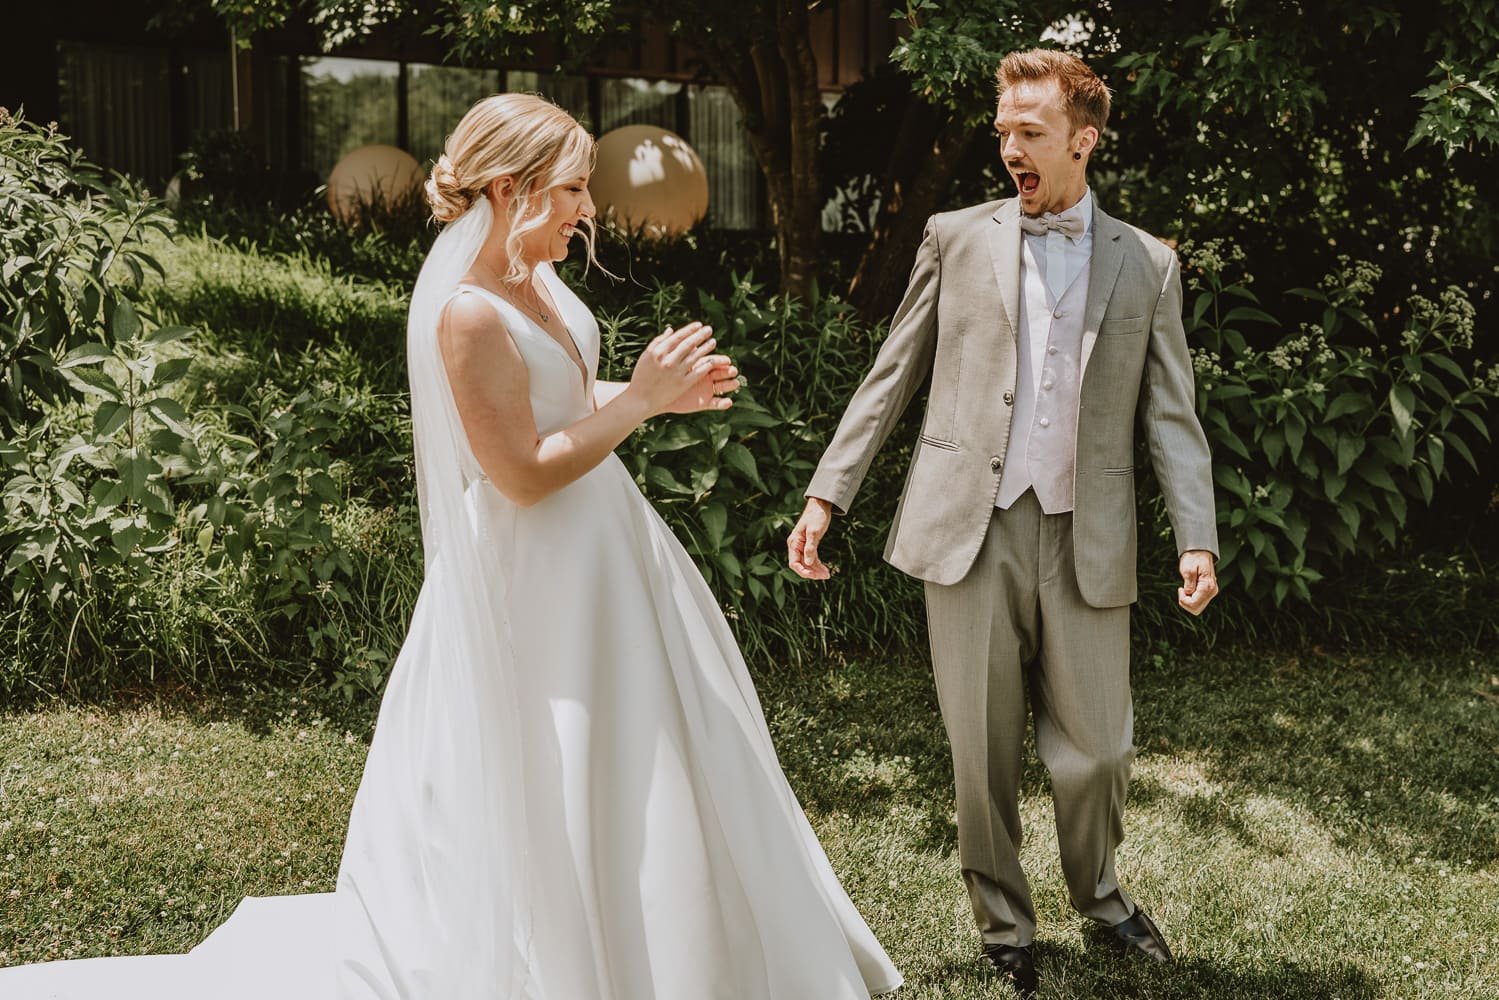 st louis wedding photographer that captures real candid expressions and moments.jpg